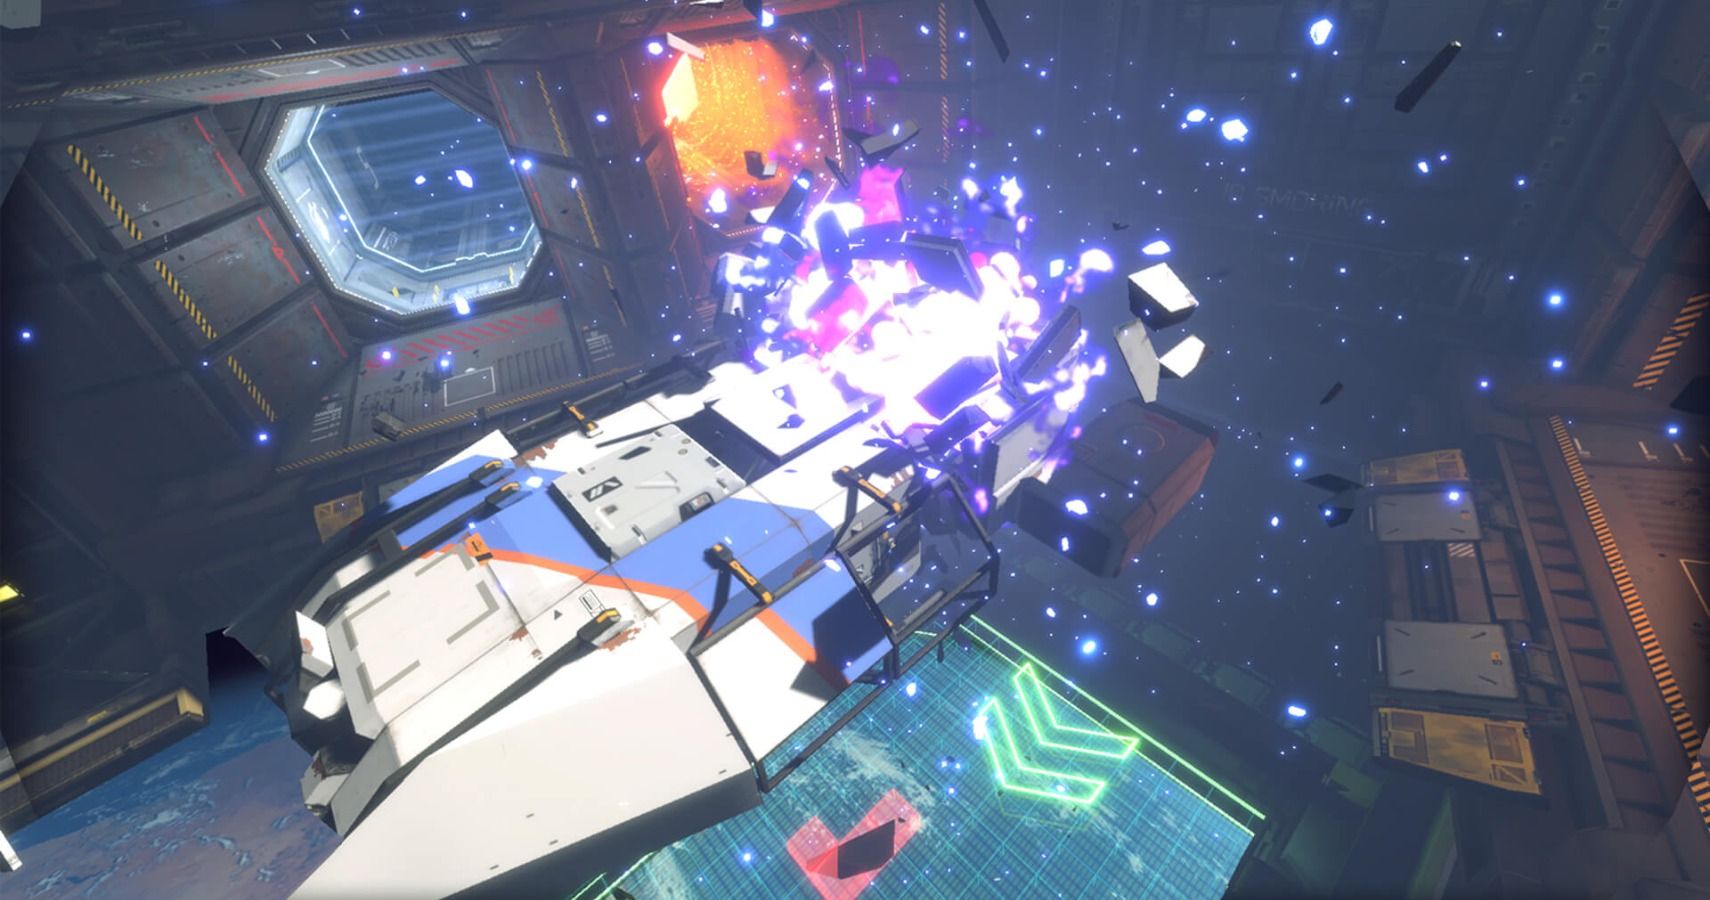 Hardspace Shipbreaker Is An Extremely Good Game That You Should Play